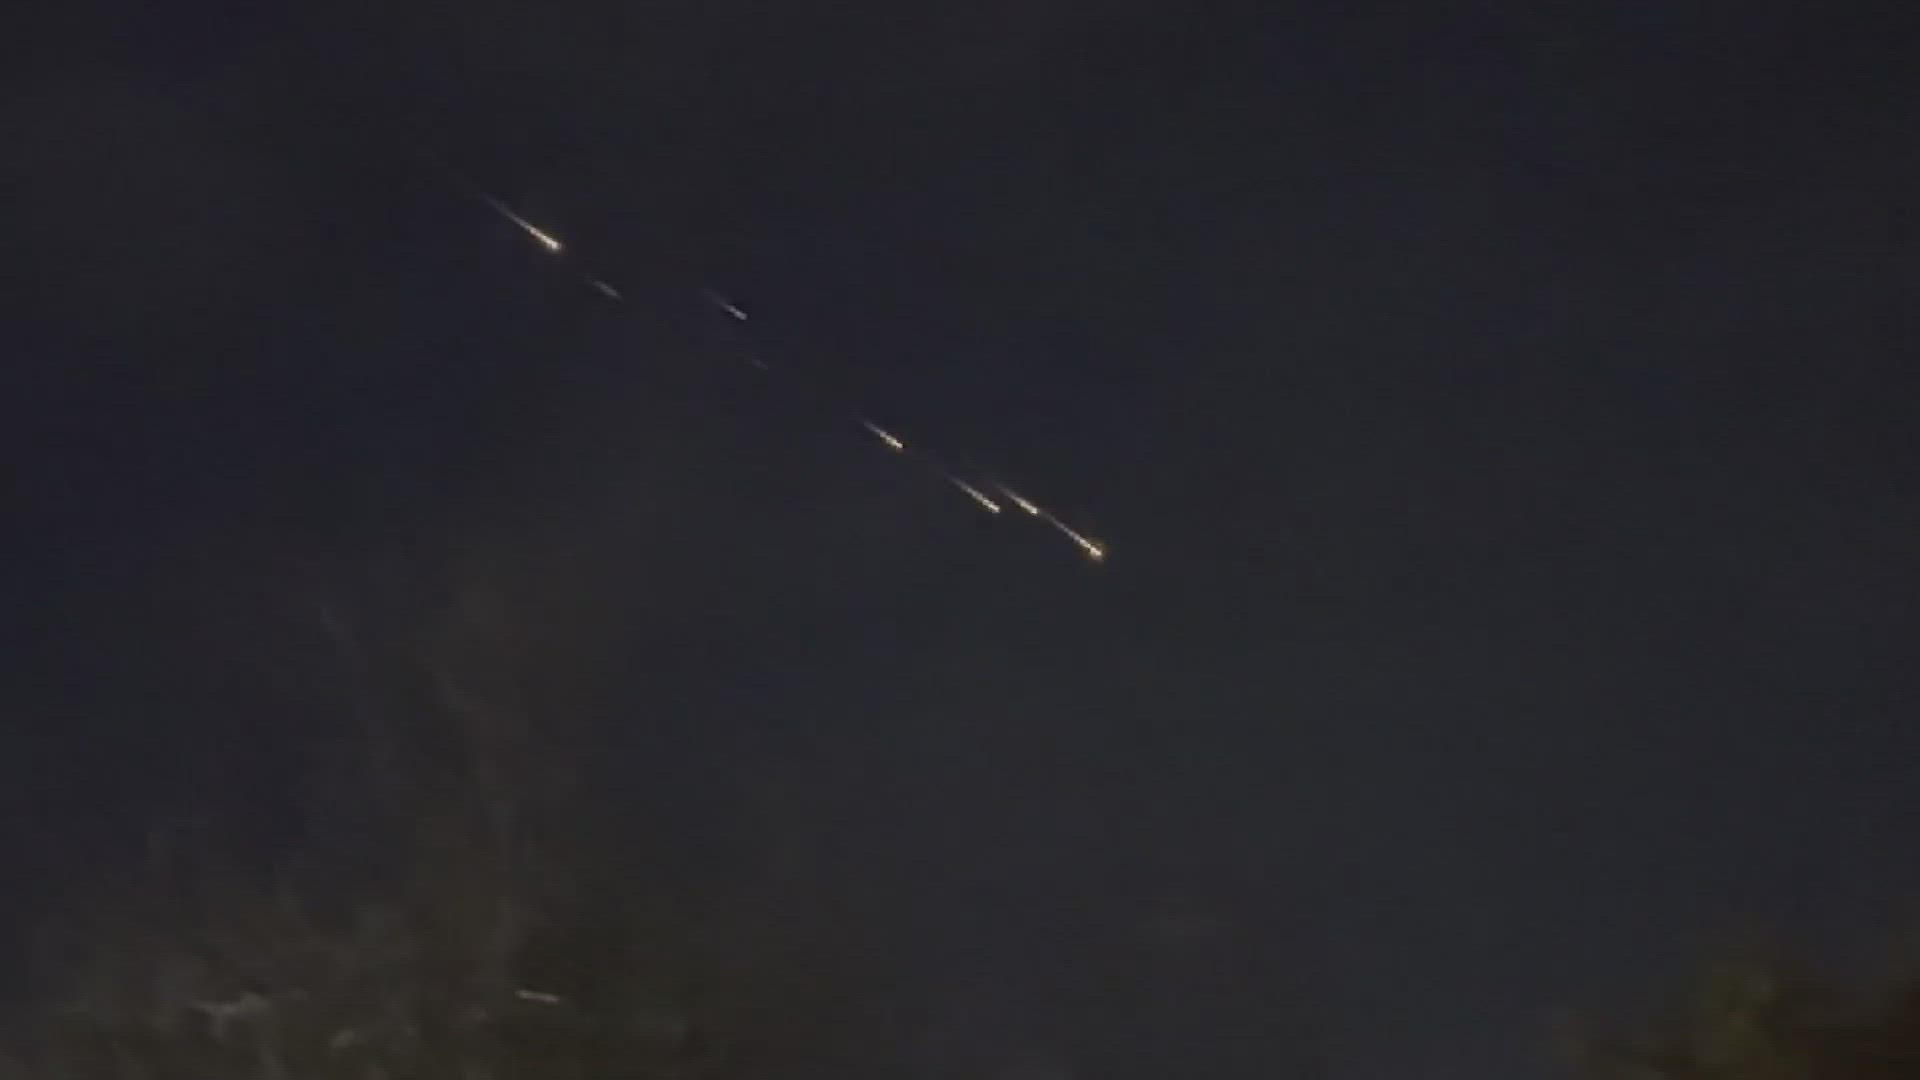 Jonathan McDowell is an Astrophysicist at the Harvard–Smithsonian Center for Astrophysics and says he is at least 99.9% sure this was space junk.